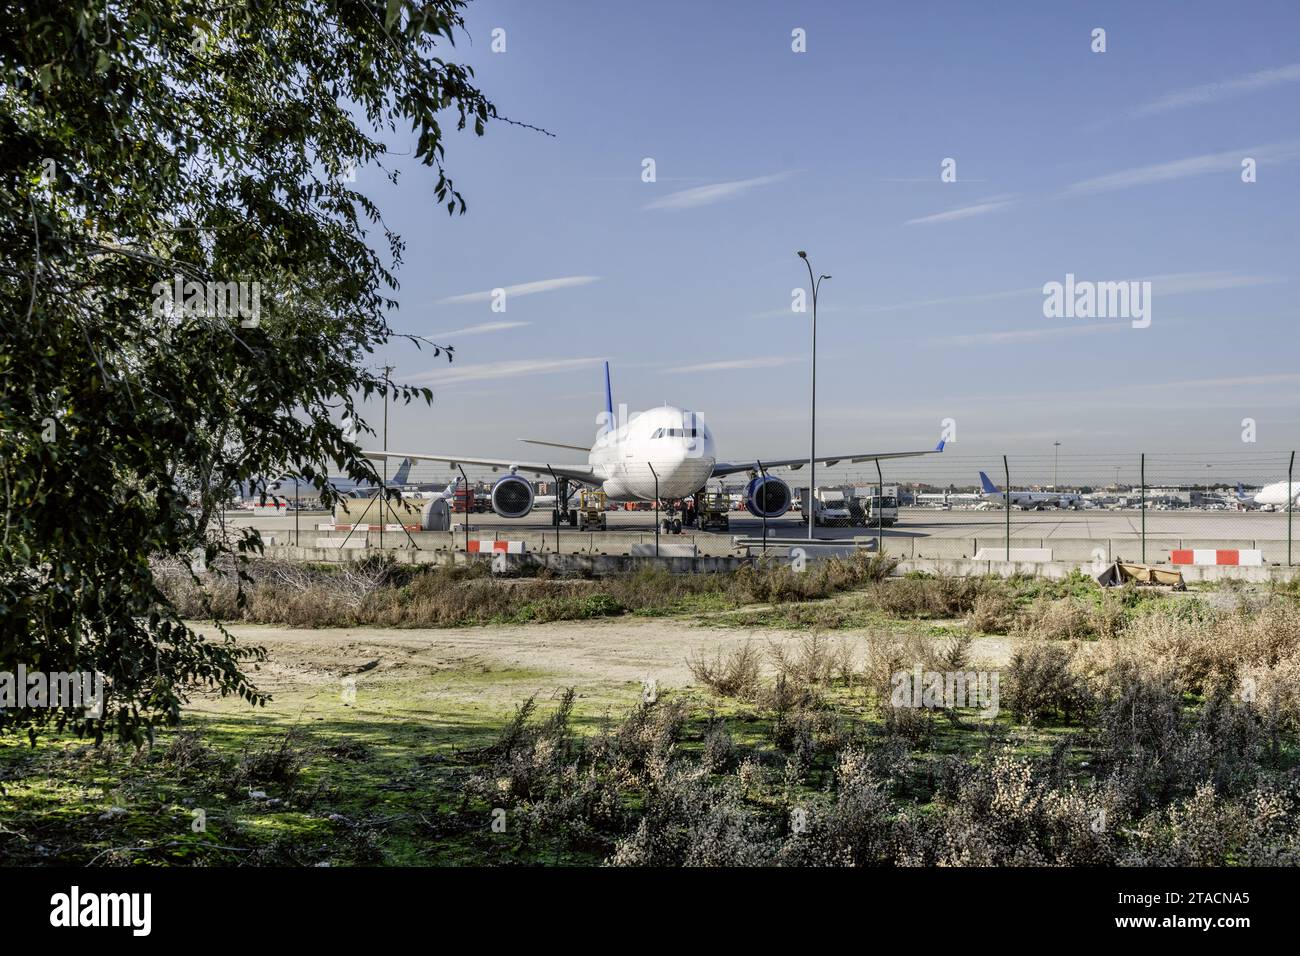 Cargo planes receiving fuel and refueling on the runway Stock Photo